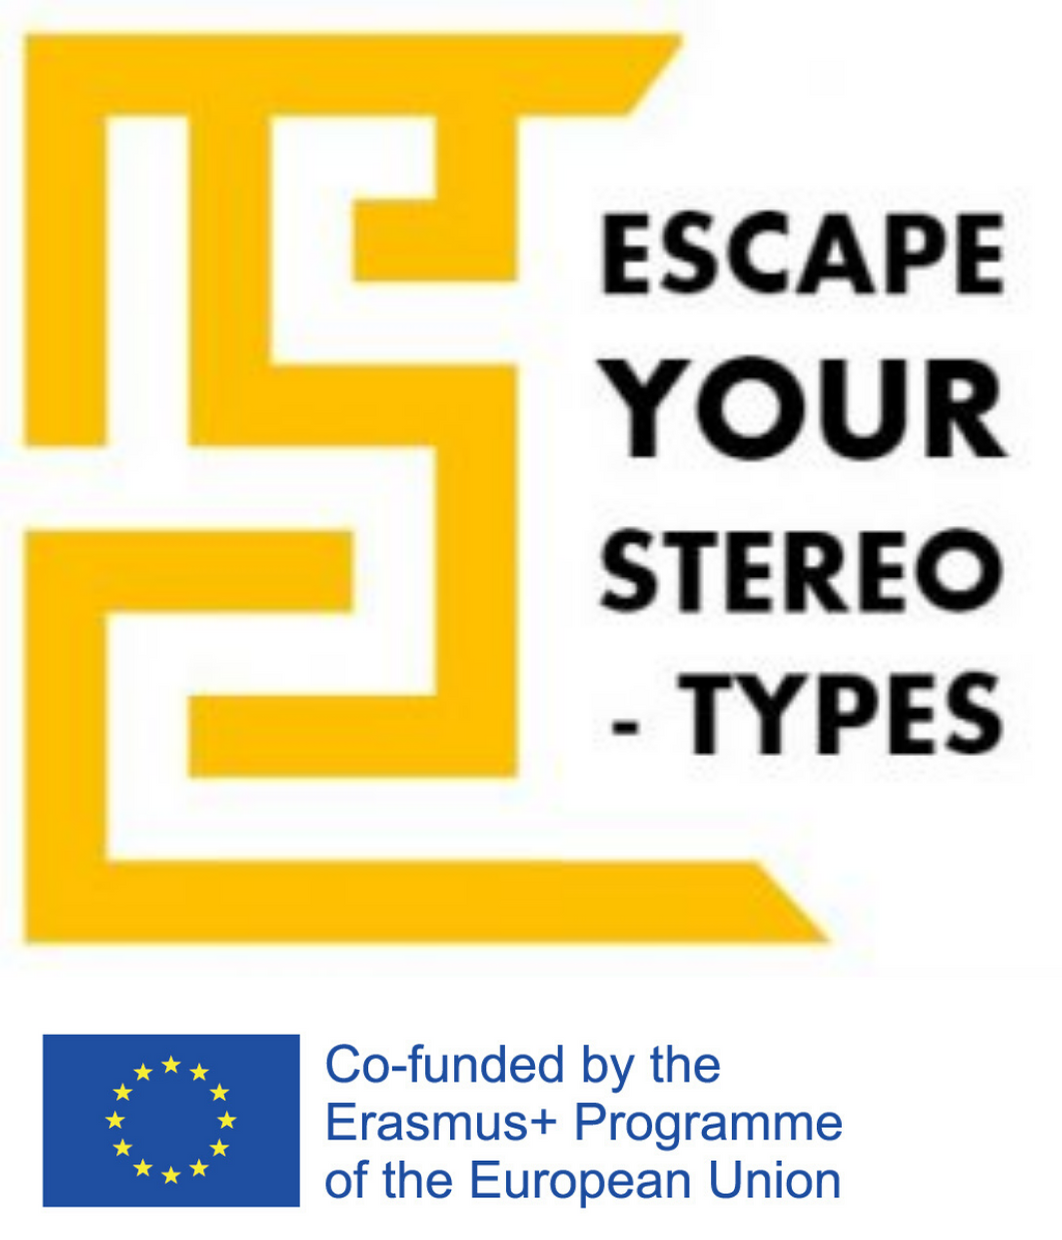 (Français) Logo Escape Your Stereotypes Project co-funded by the Erasmus+ Programme of the European Union. The goal of Escape your Stereotypes project is to create an educational escape game focused on interculturality and the fight against prejudices and stereotypes. Escape your Stereotypes project is supported by the Erasmus+ programme of the European Commission.